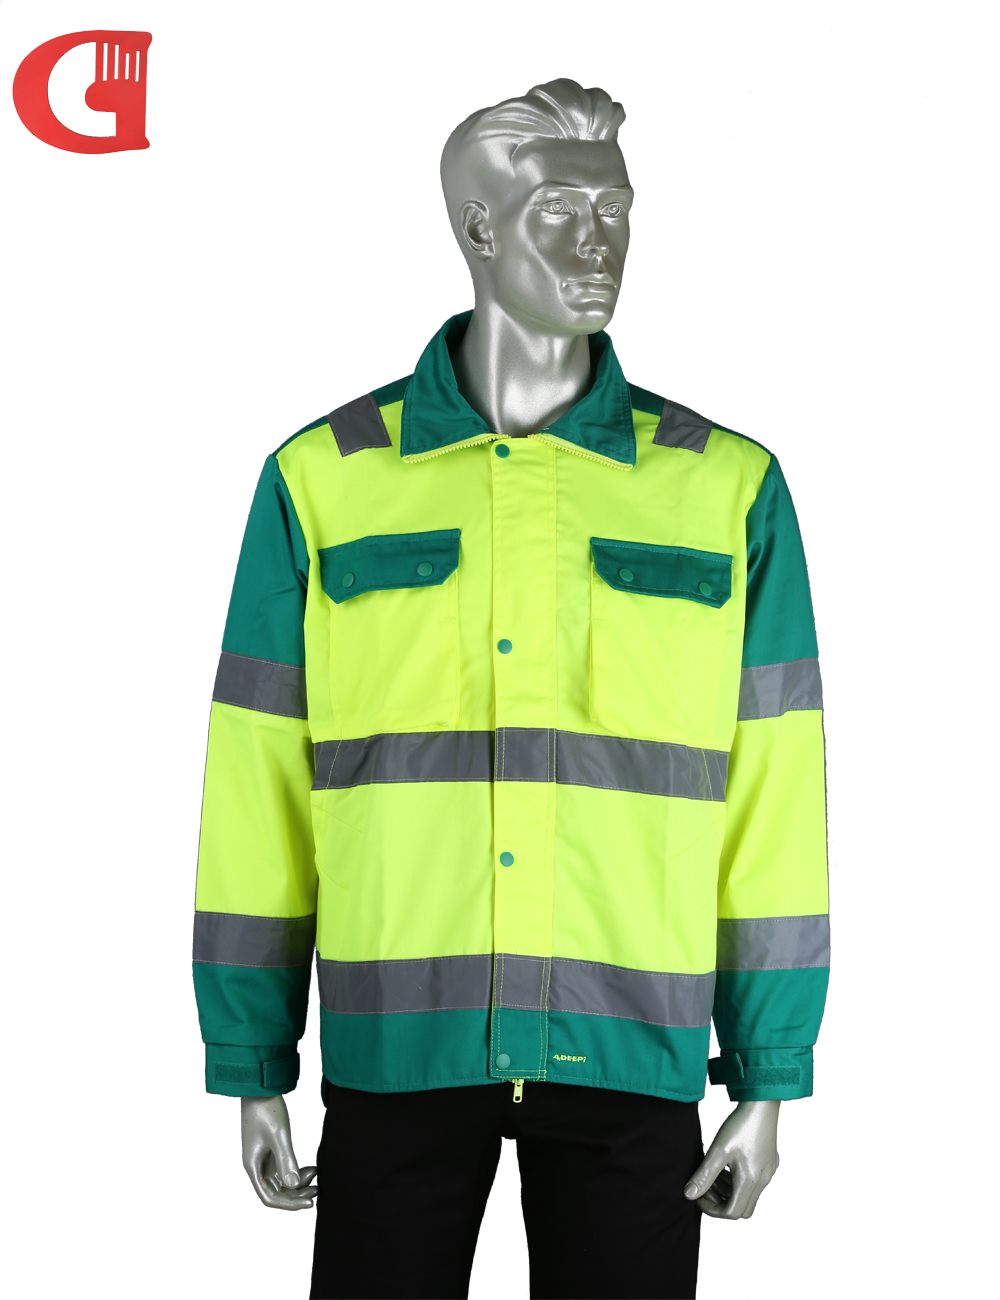  Bi Color Work Jacket with tape High Quality Safety Workwear Jackets